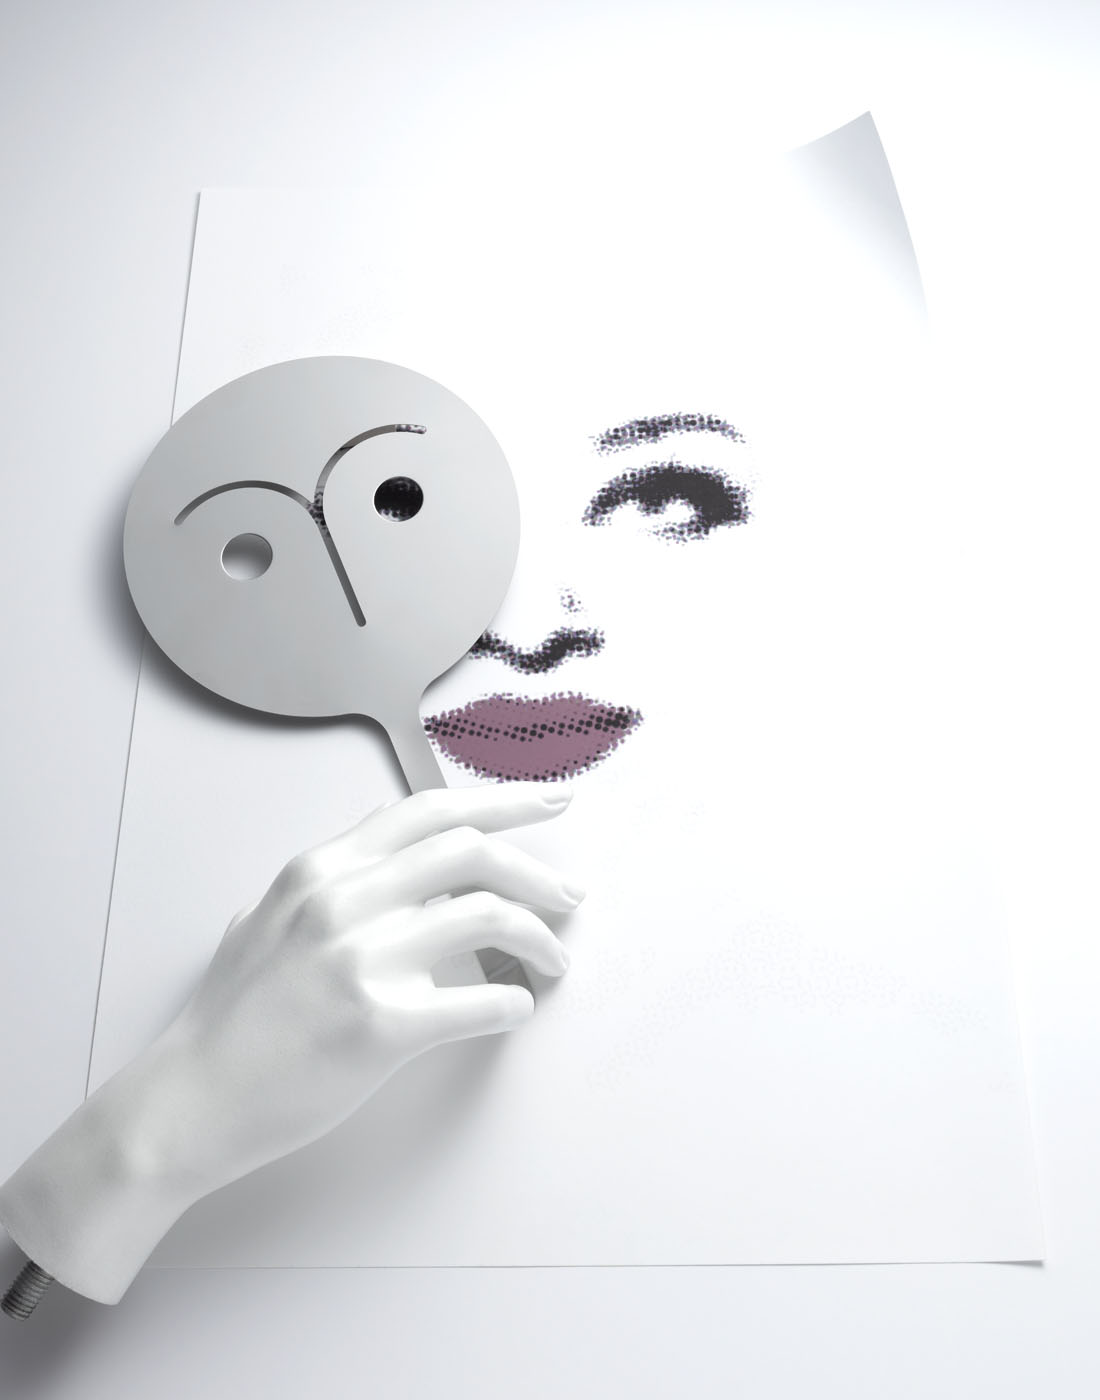 Paper mask by Alexander Kent London based still life and product photographer.